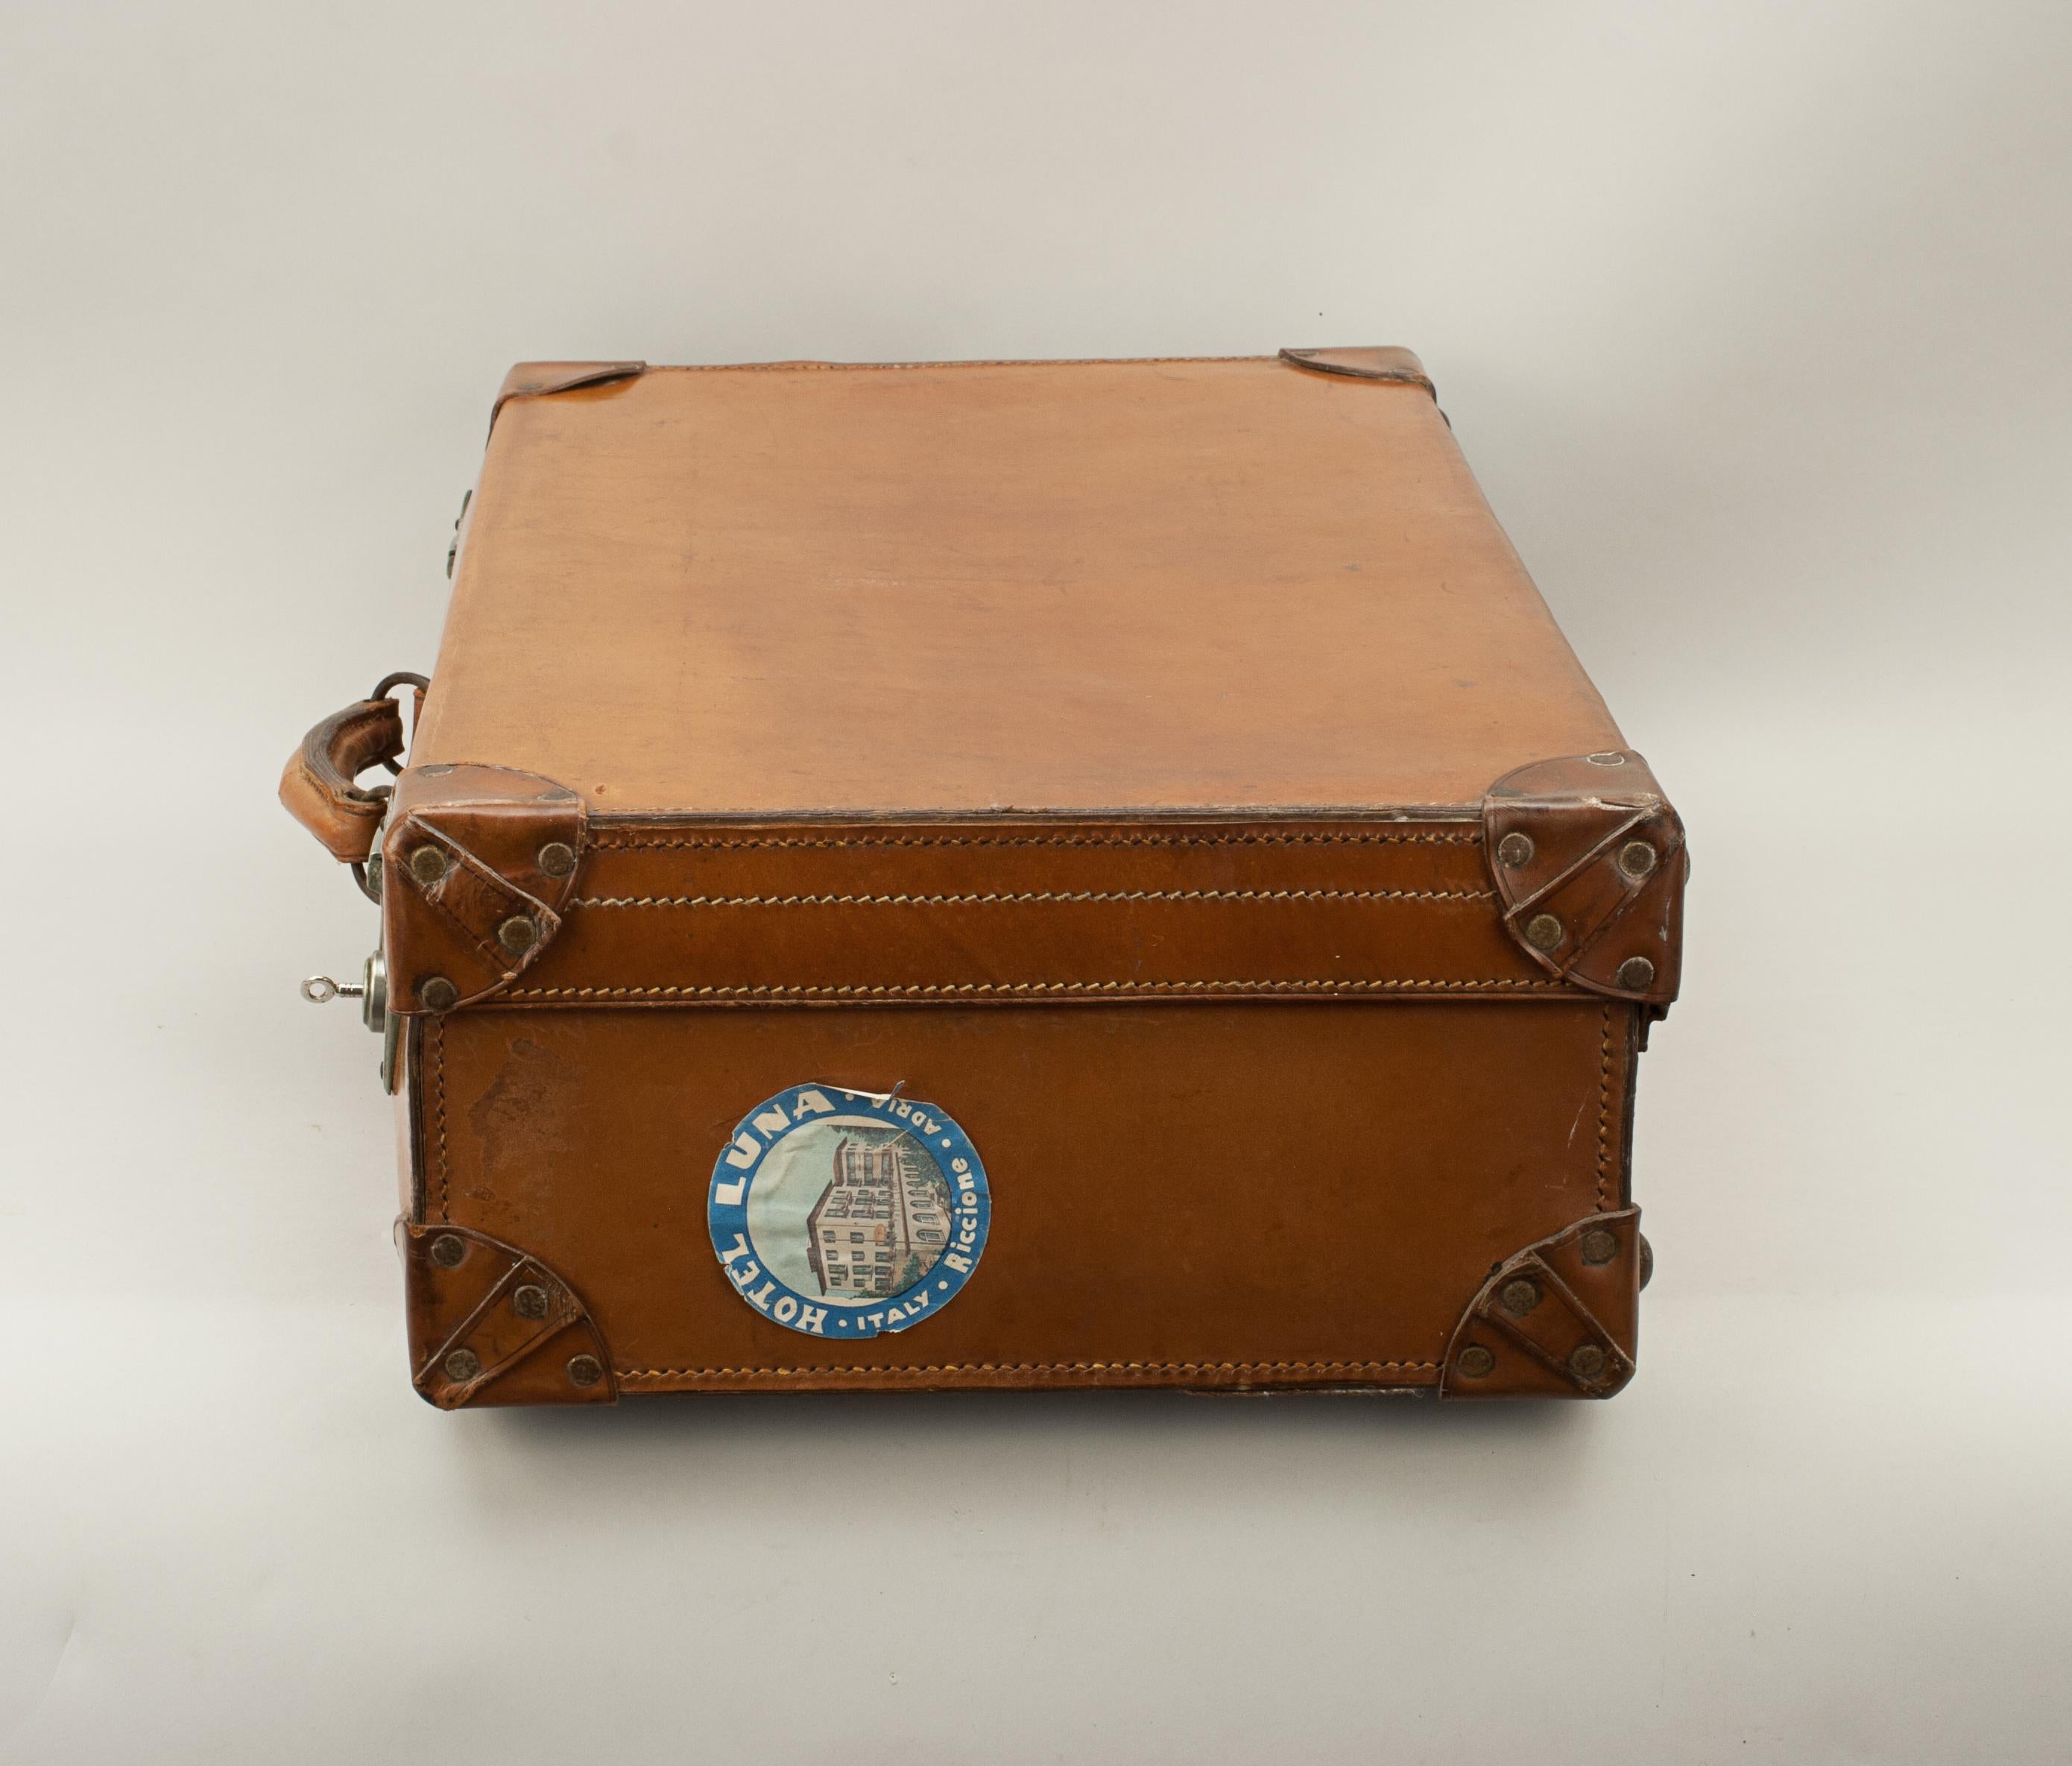 Antique Leather Suitcase, Travelling Luggage or Motoring Case 2